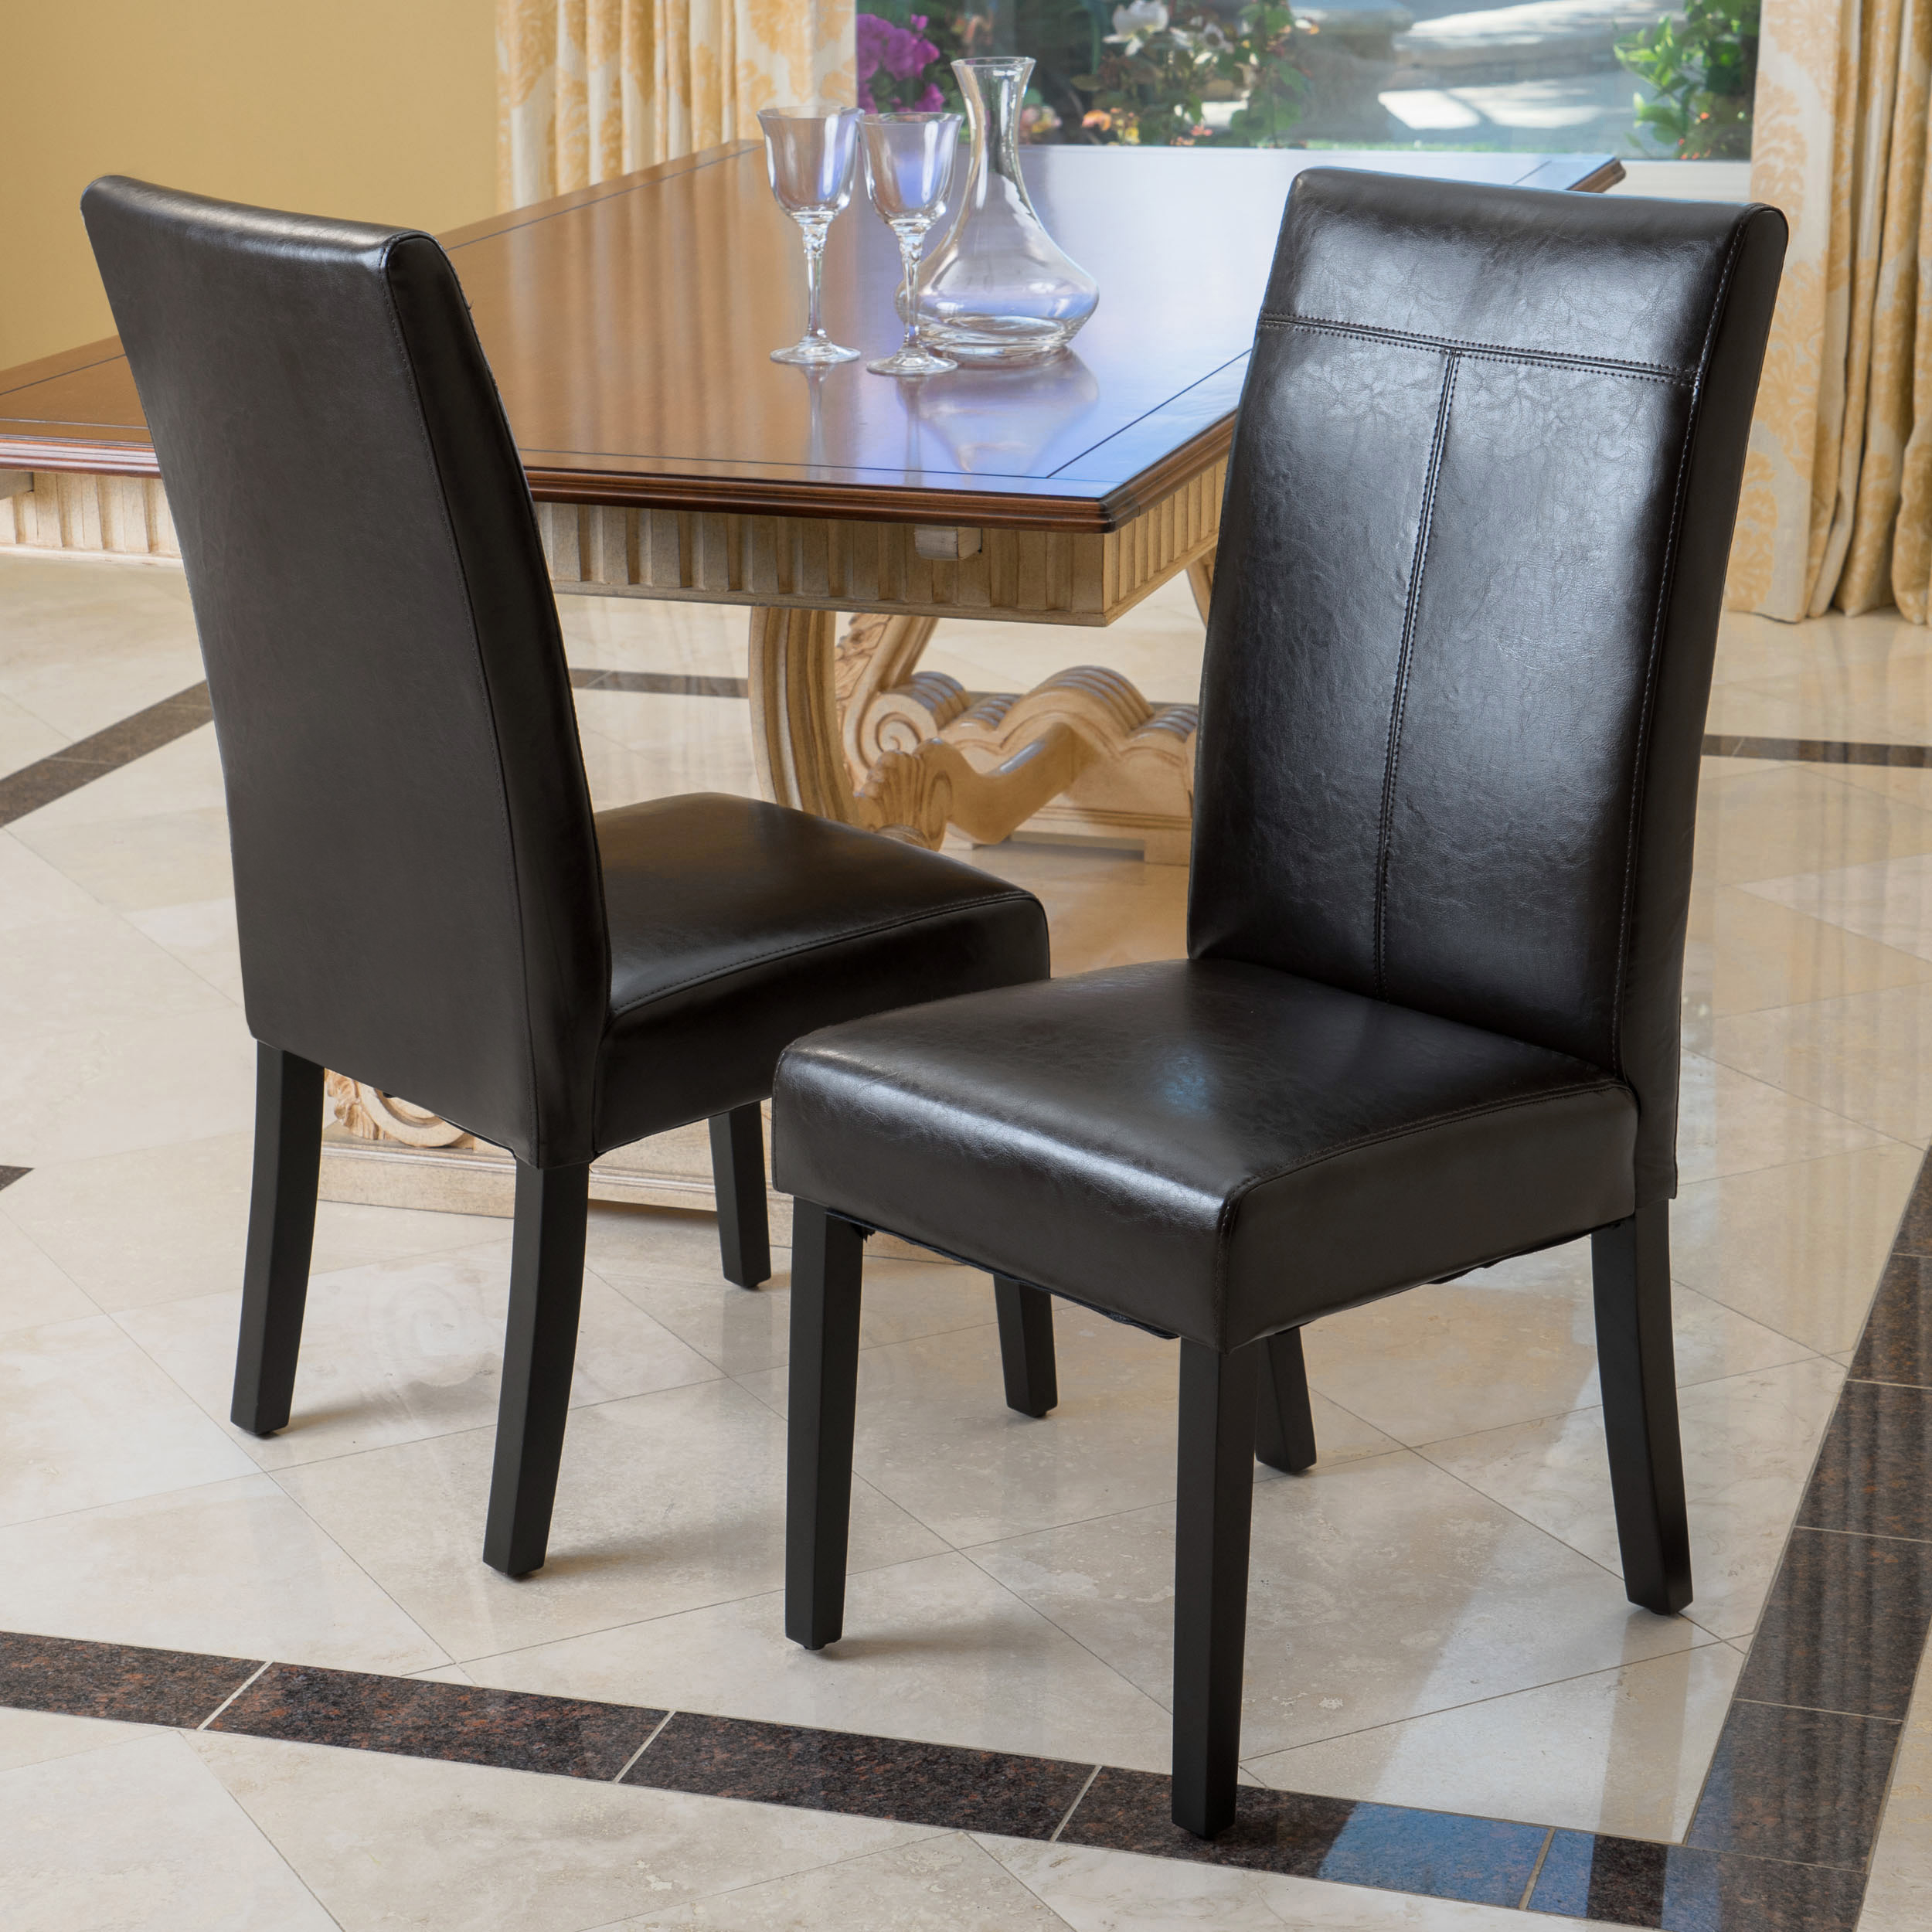 Lissa Contemporary T-Stitch Upholstered Dining Chairs (Set Of 2) - Black, Leather